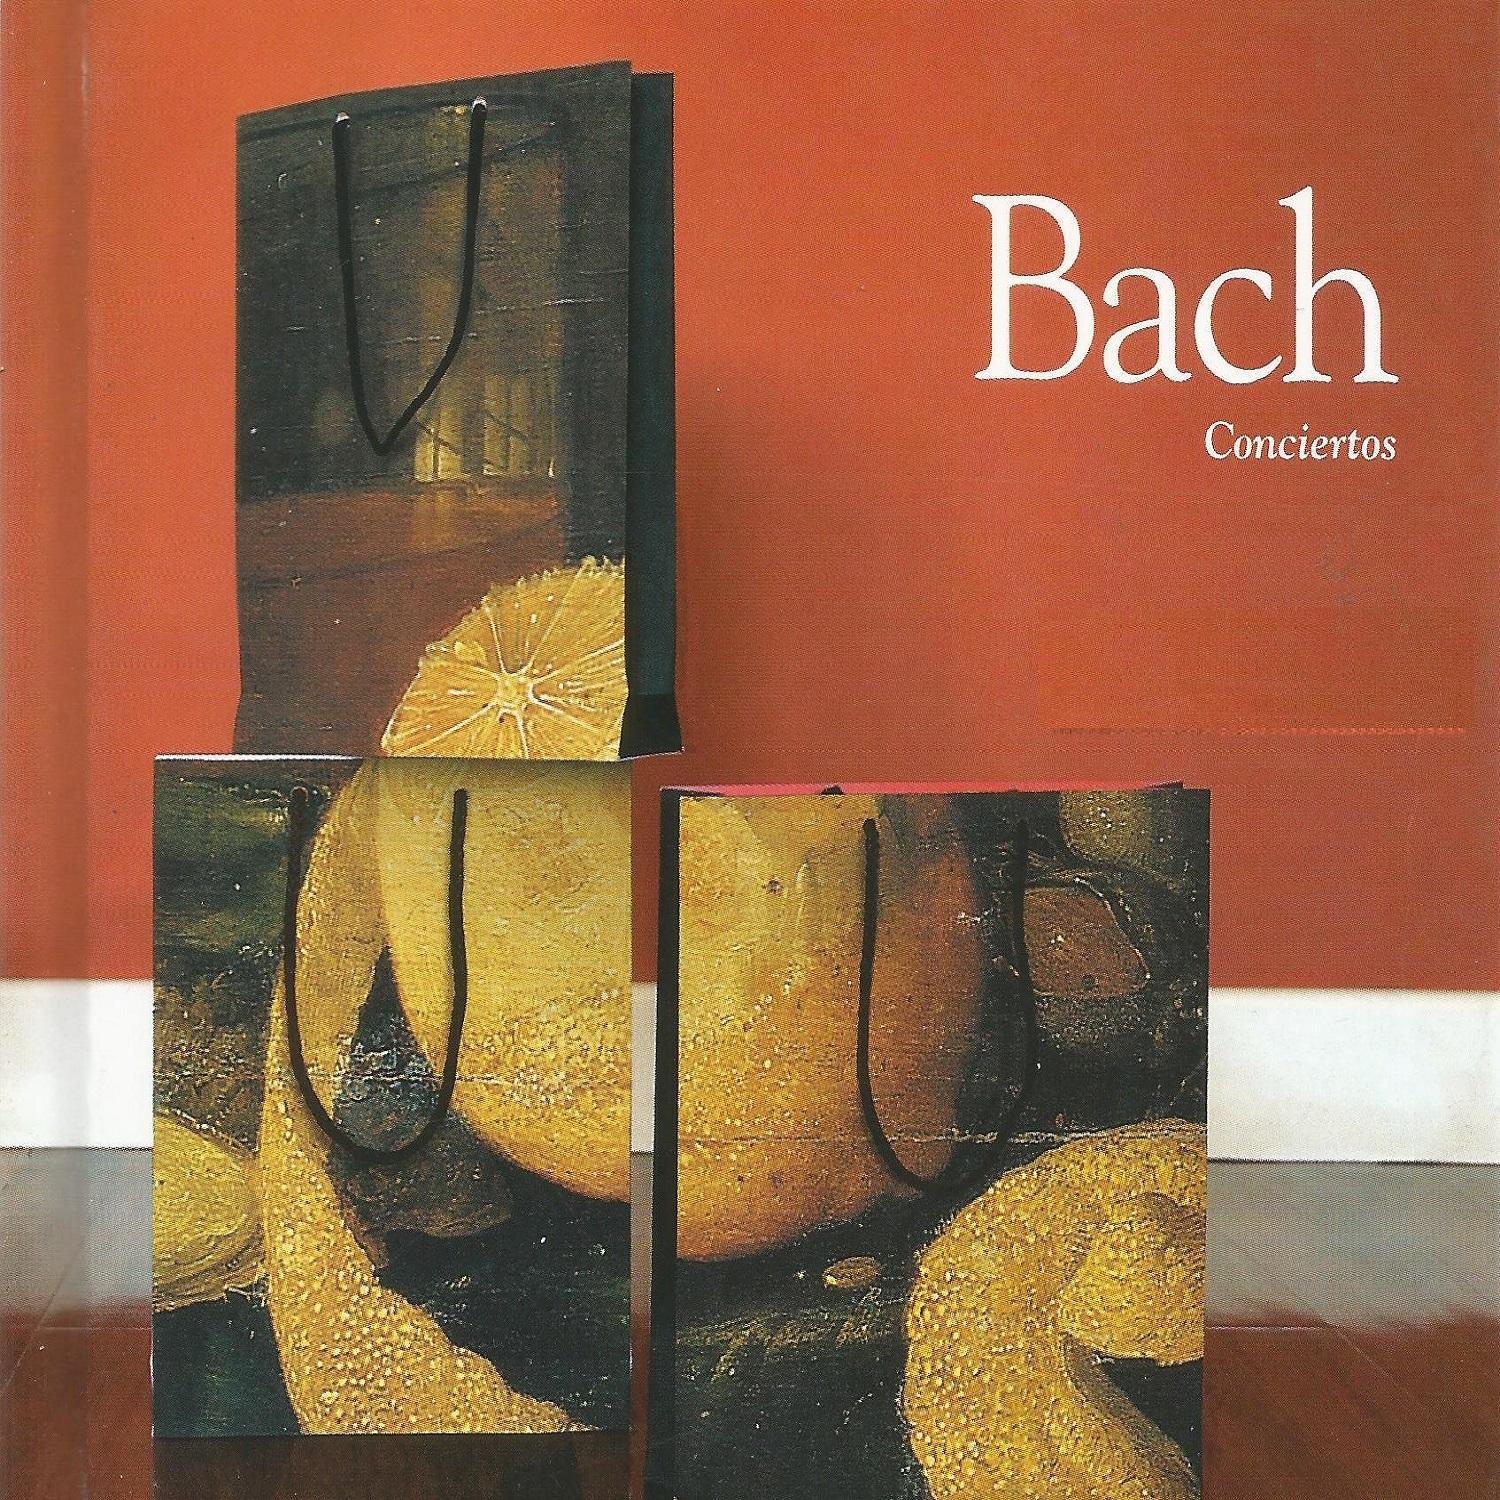 Orchestral Suite No. 1 in C Major, BWV 1066: II.Courante